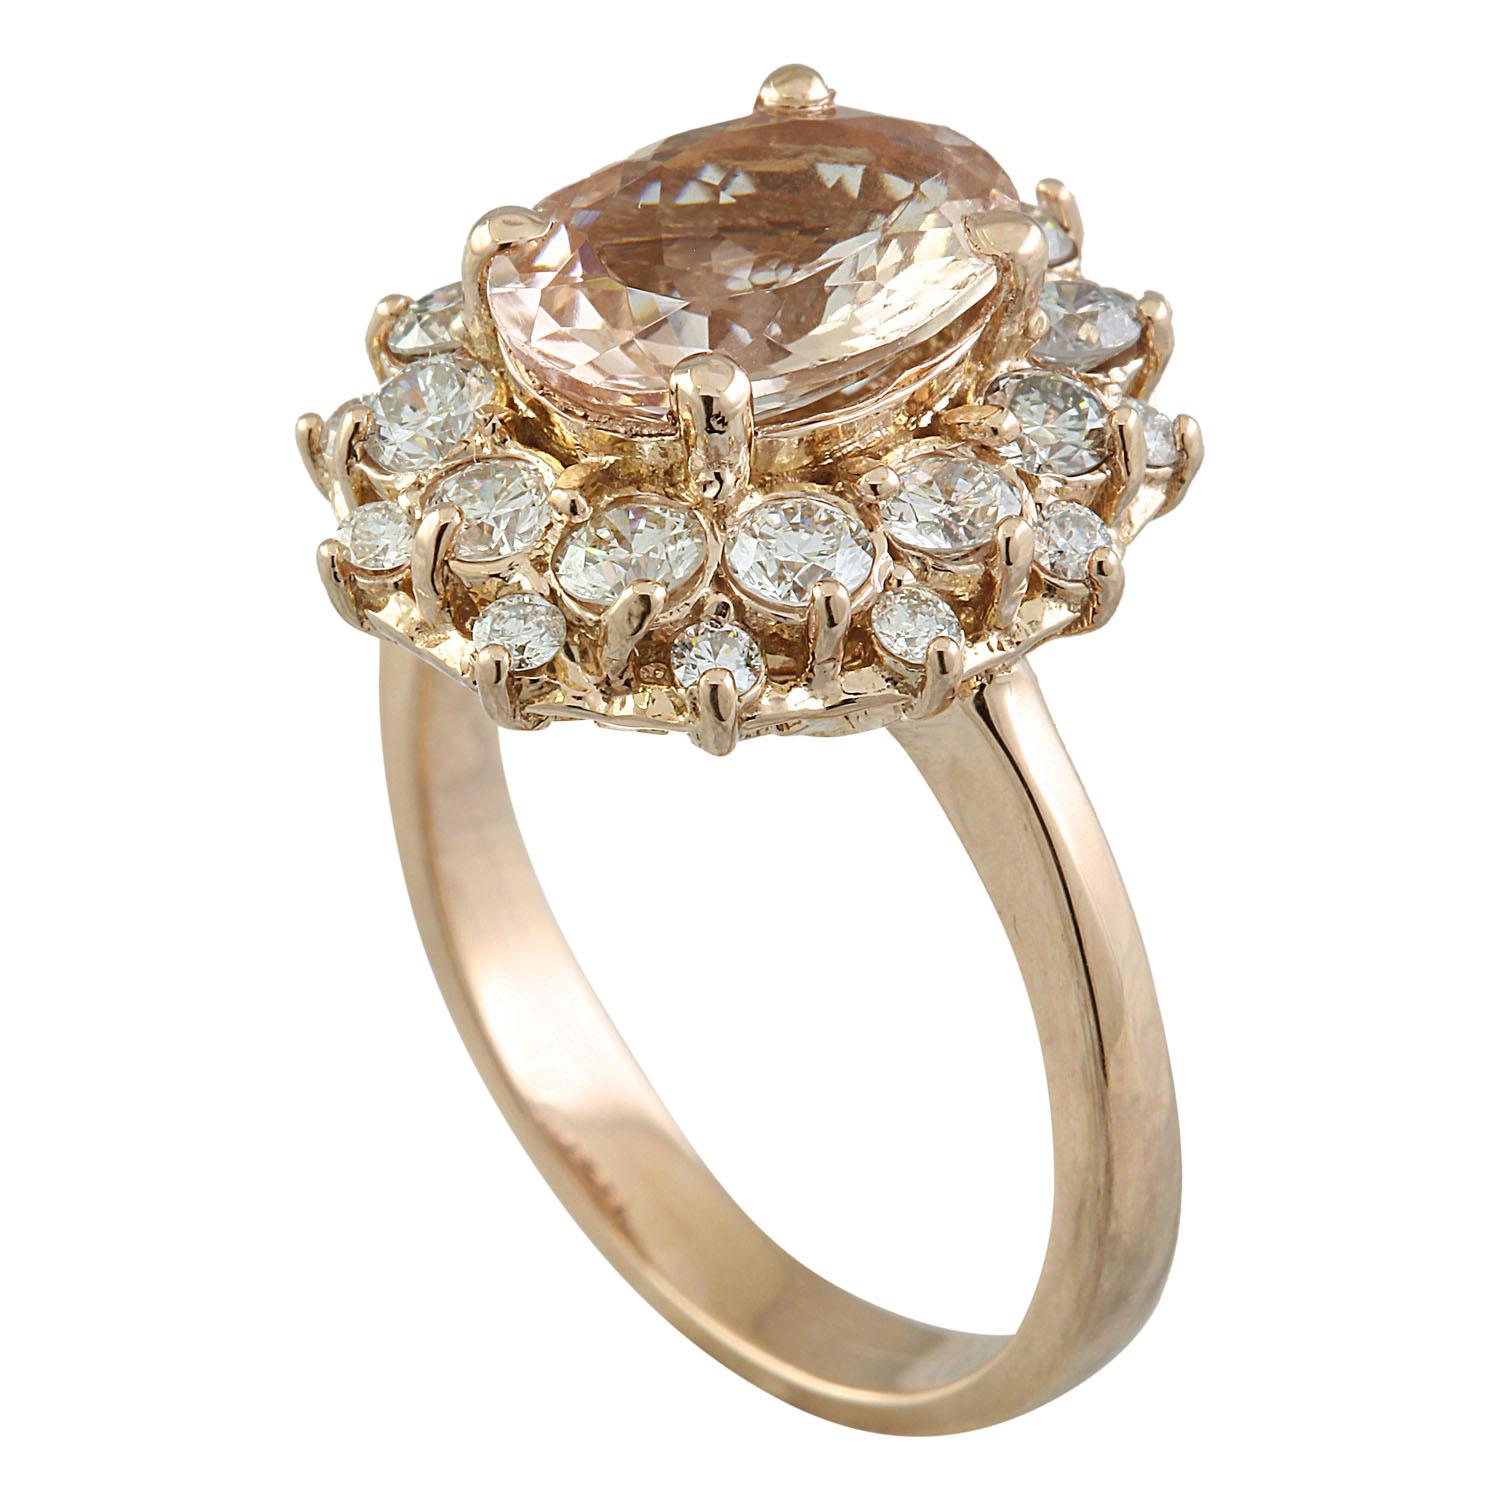 3.90 Carat Natural Morganite 14 Karat Solid Rose Gold Diamond Ring
Stamped: 14K 
Ring Size: 7 
Total Ring Weight: 6.2 Grams 
Morganite Weight: 2.80 Carat (10.00x8.00 Millimeter) 
Diamond Weight: 1.10 Carat (F-G Color, VS2-SI1 Clarity) 
Face